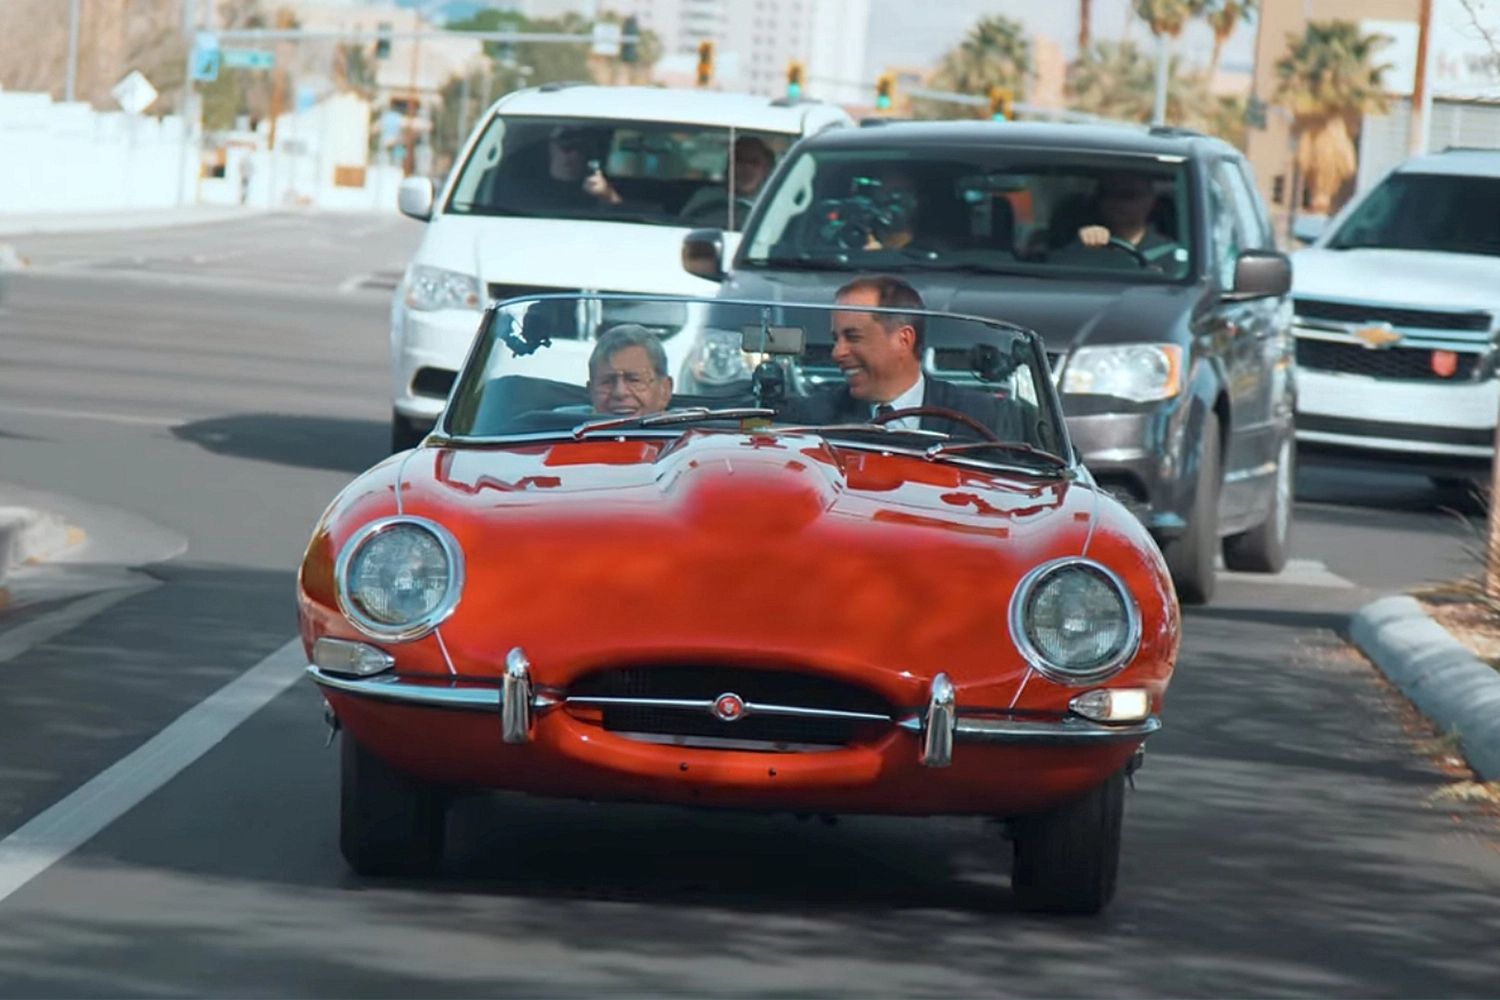 Lorne Michaels and Jerry Seinfeld ride in a 1955 Mercedes-Benz 300 SL Gullwing